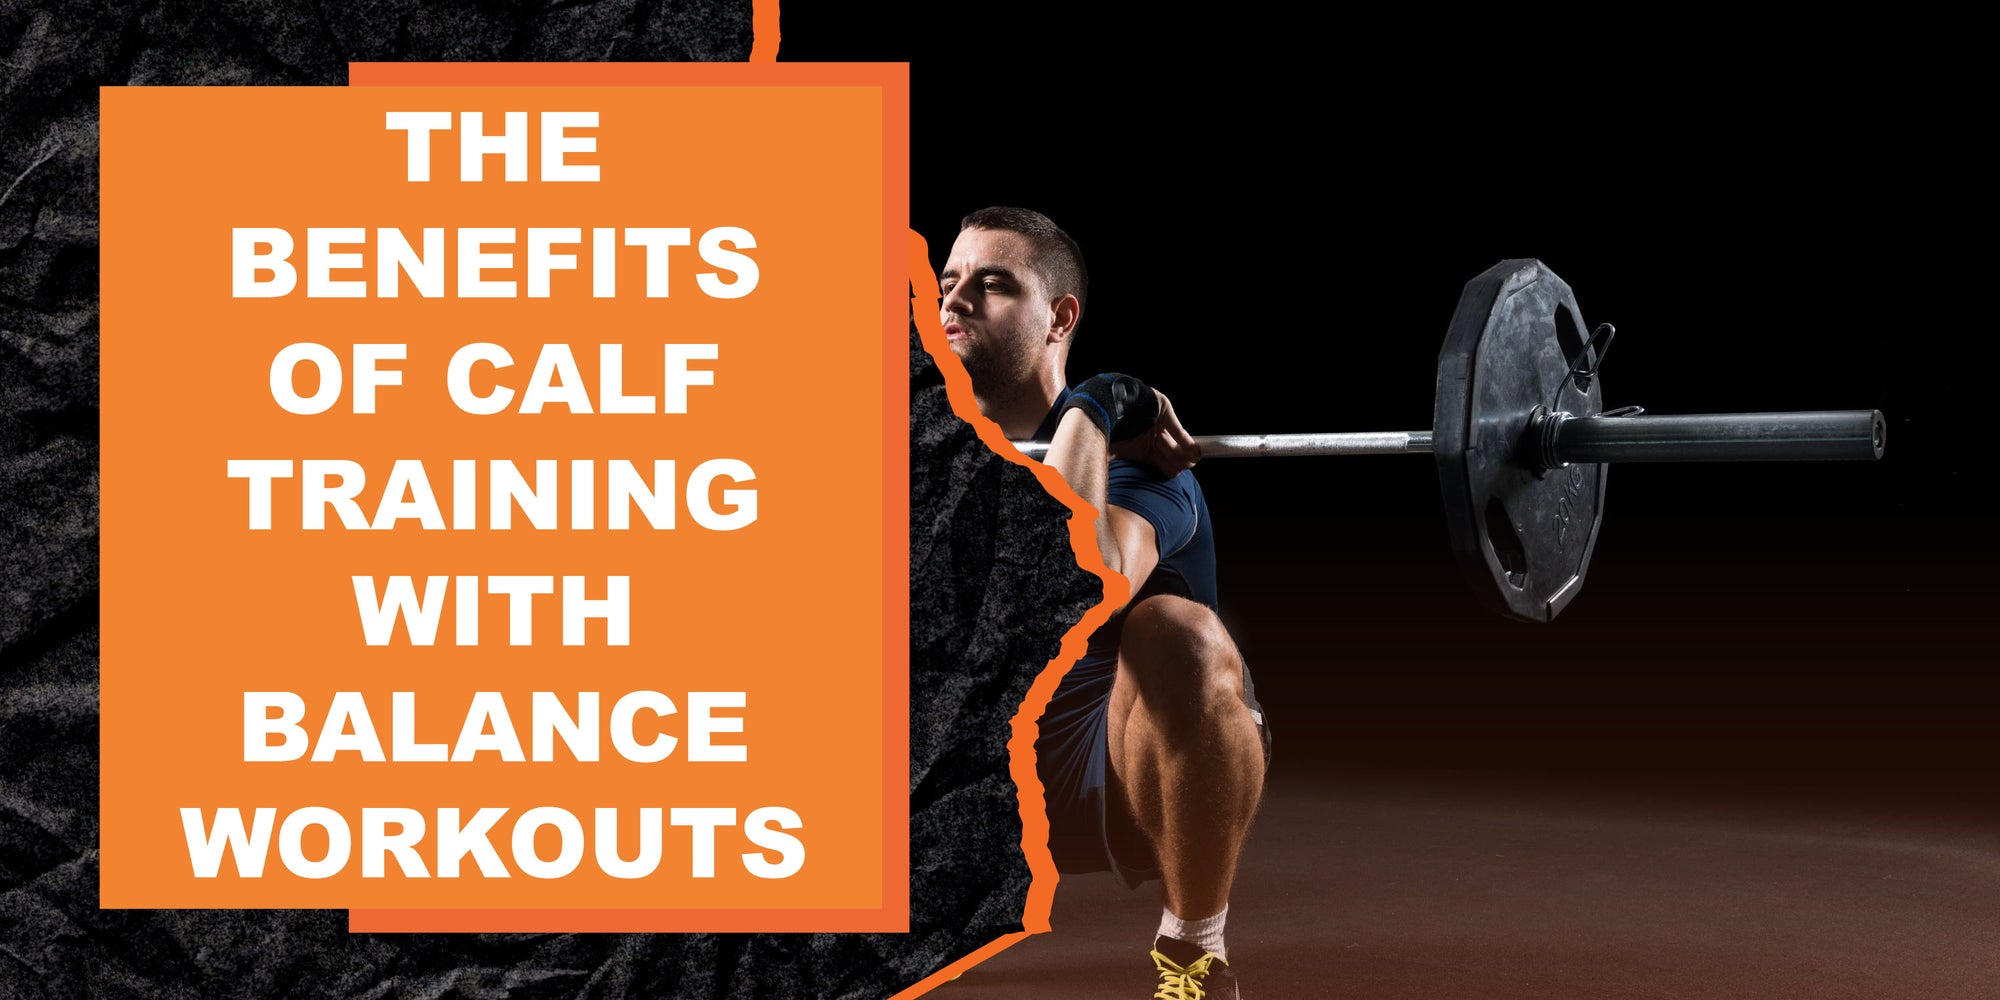 The Benefits of Calf Training with Balance Workouts